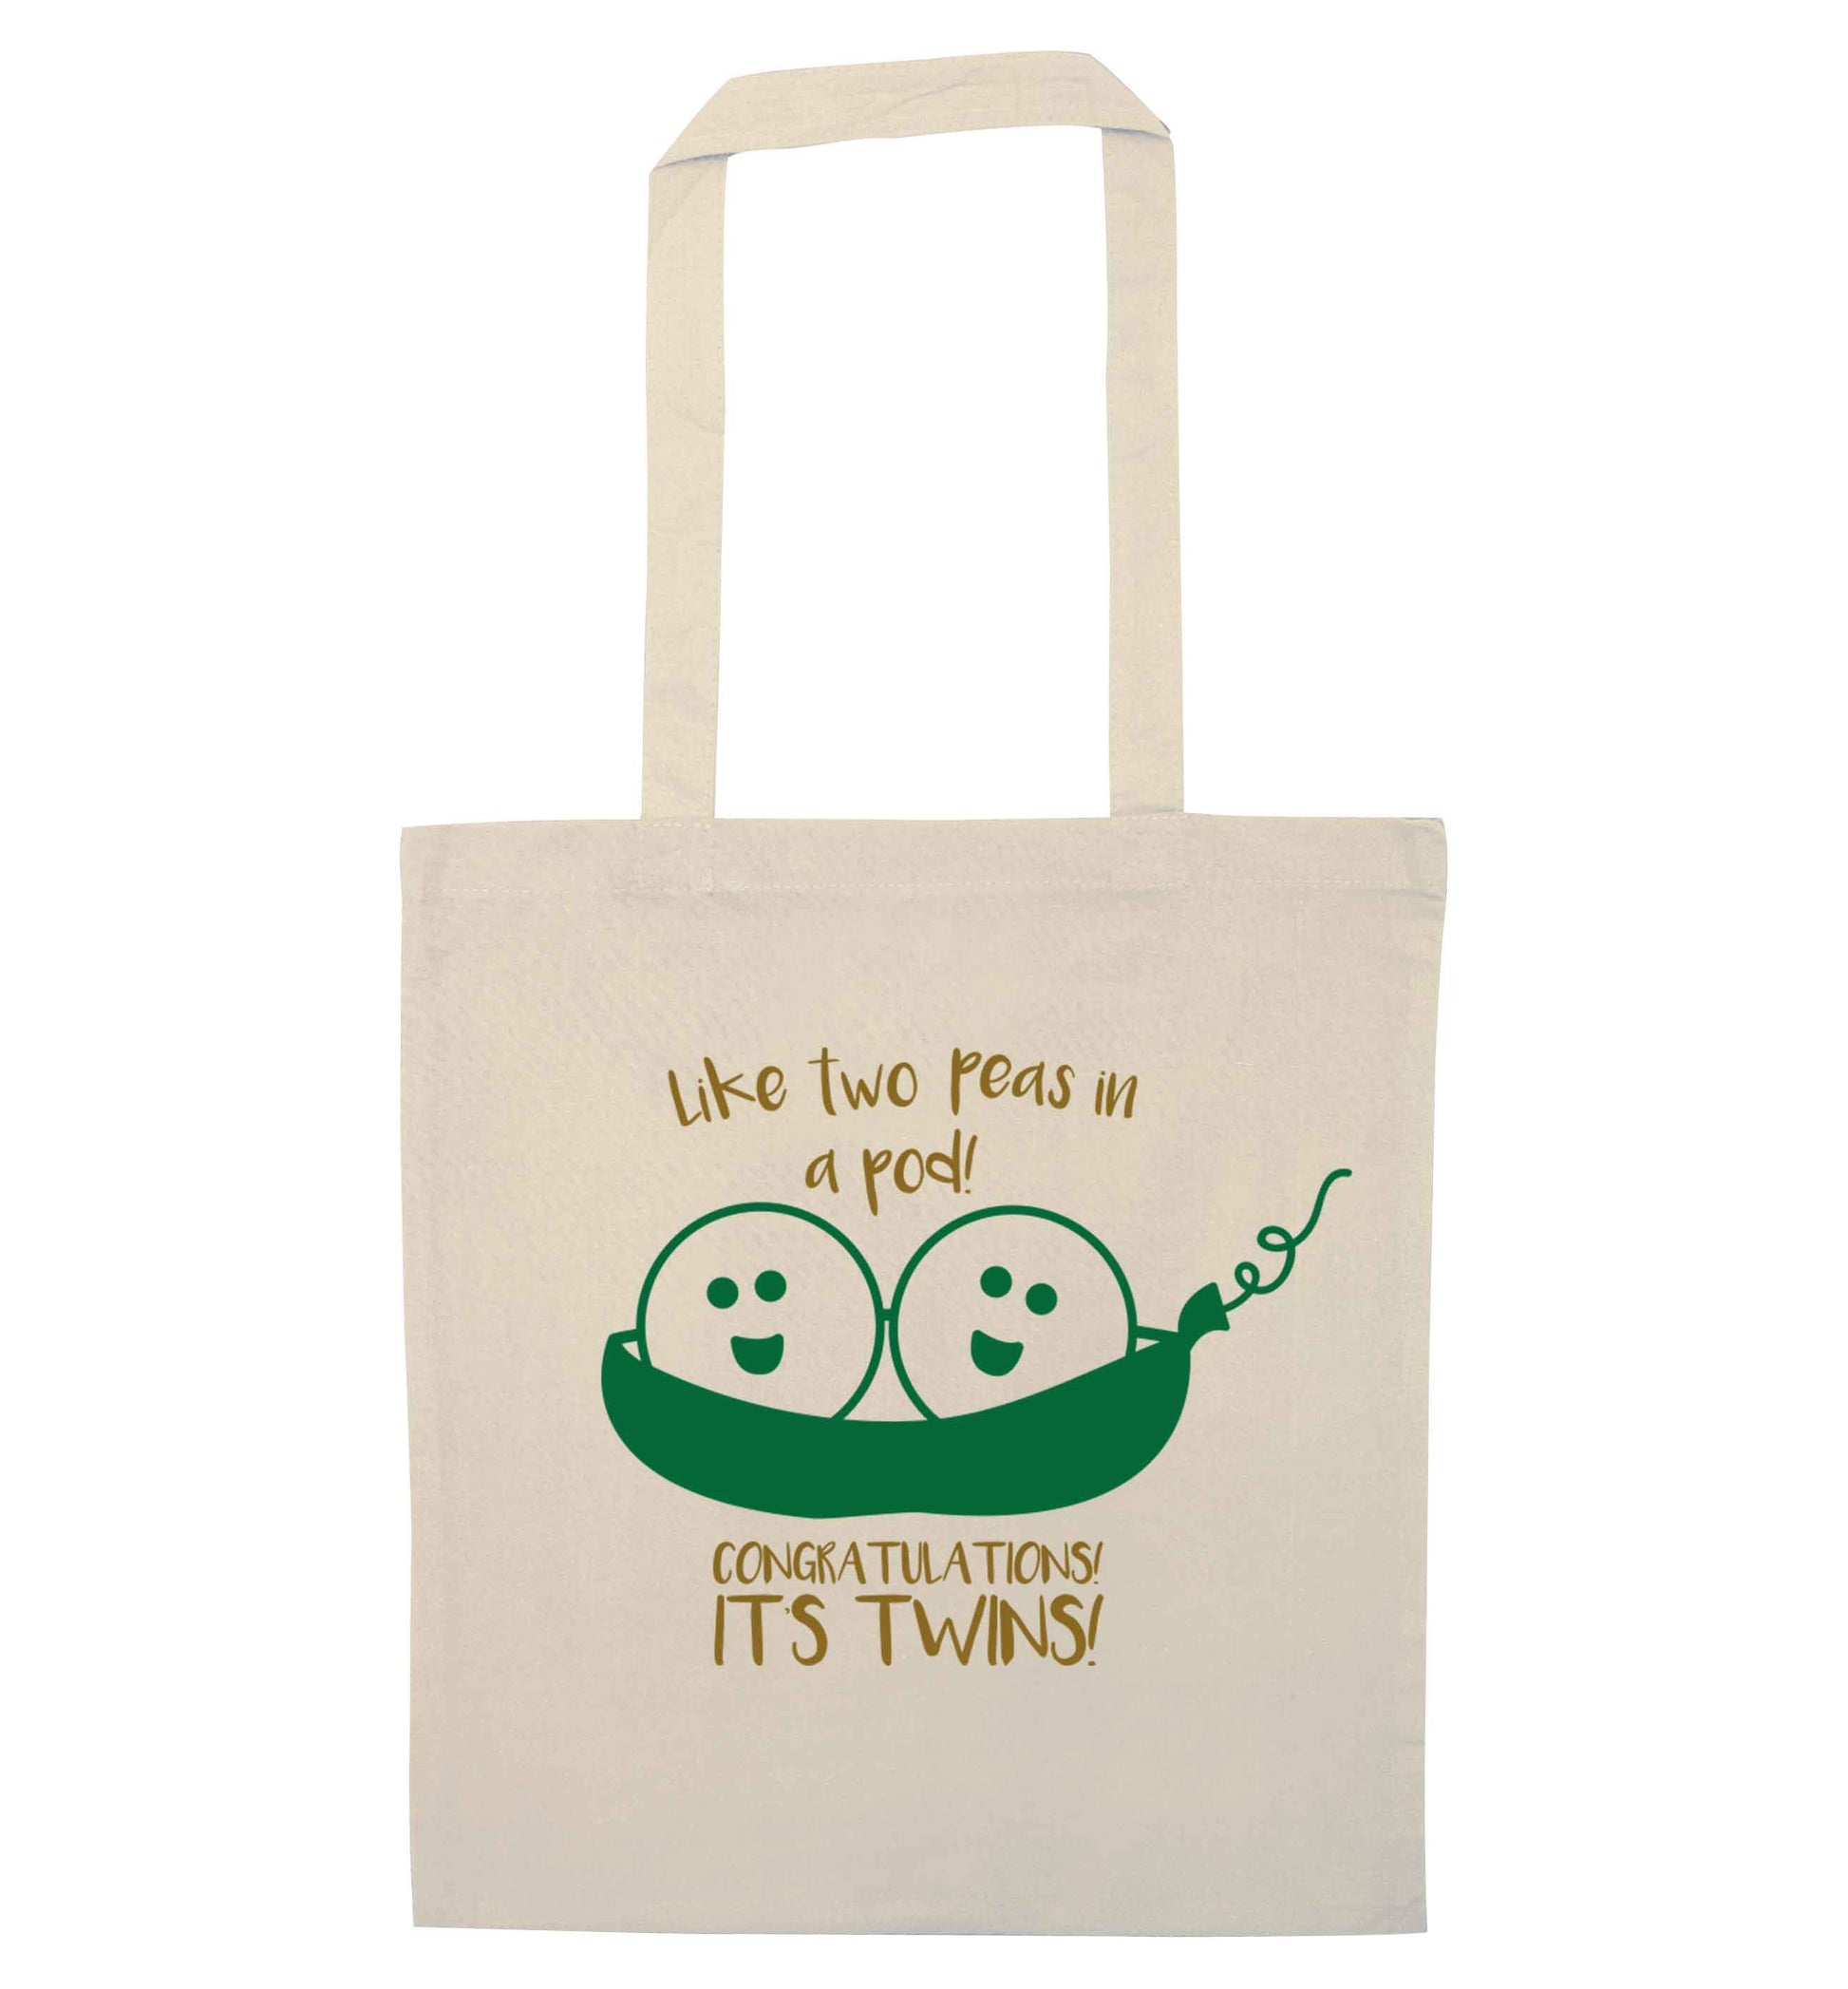 Like two peas in a pod! Congratulations it's twins! natural tote bag